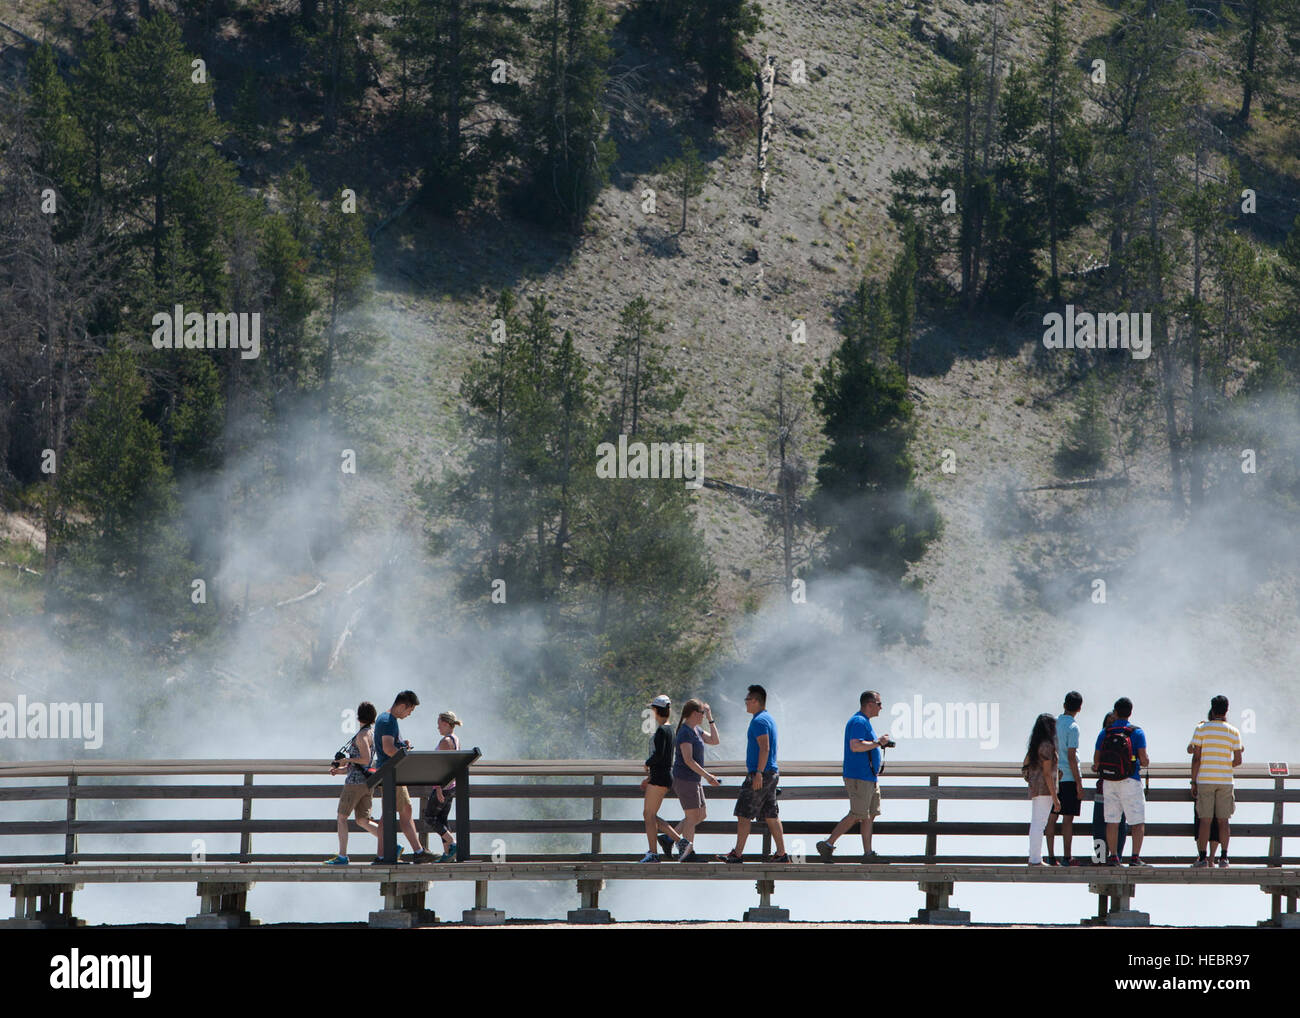 Crowds observe the Excelsior Geyser Crater from the safety of a boardwalk in Yellowstone National Park, Wyo., July 4, 2015. A visit to Yellowstone was part of an F.E. Warren Air Force Base Outdoor Recreation trip which included sightseeing some of the geological wonders of the park. (U.S. Air Force photo by Lan Kim) Stock Photo